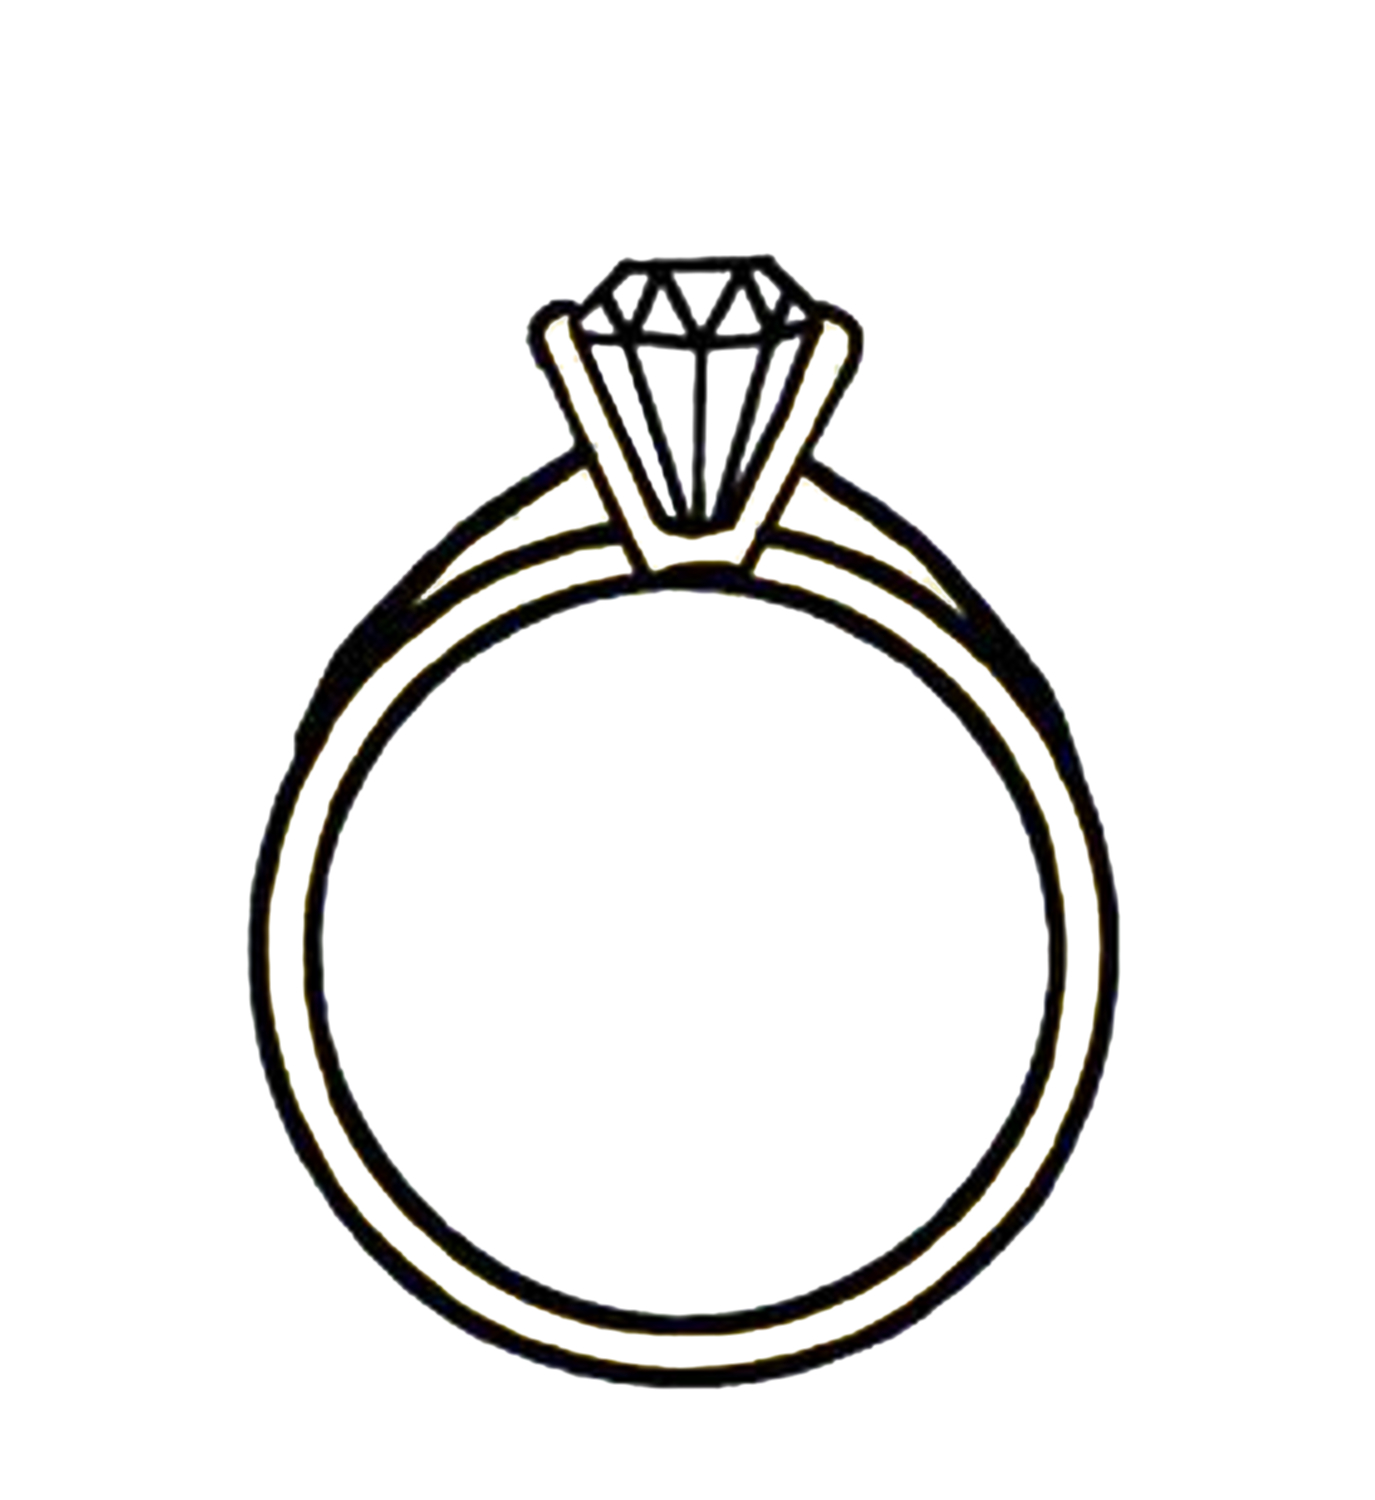 Diamond ring clipart free clipart images 4